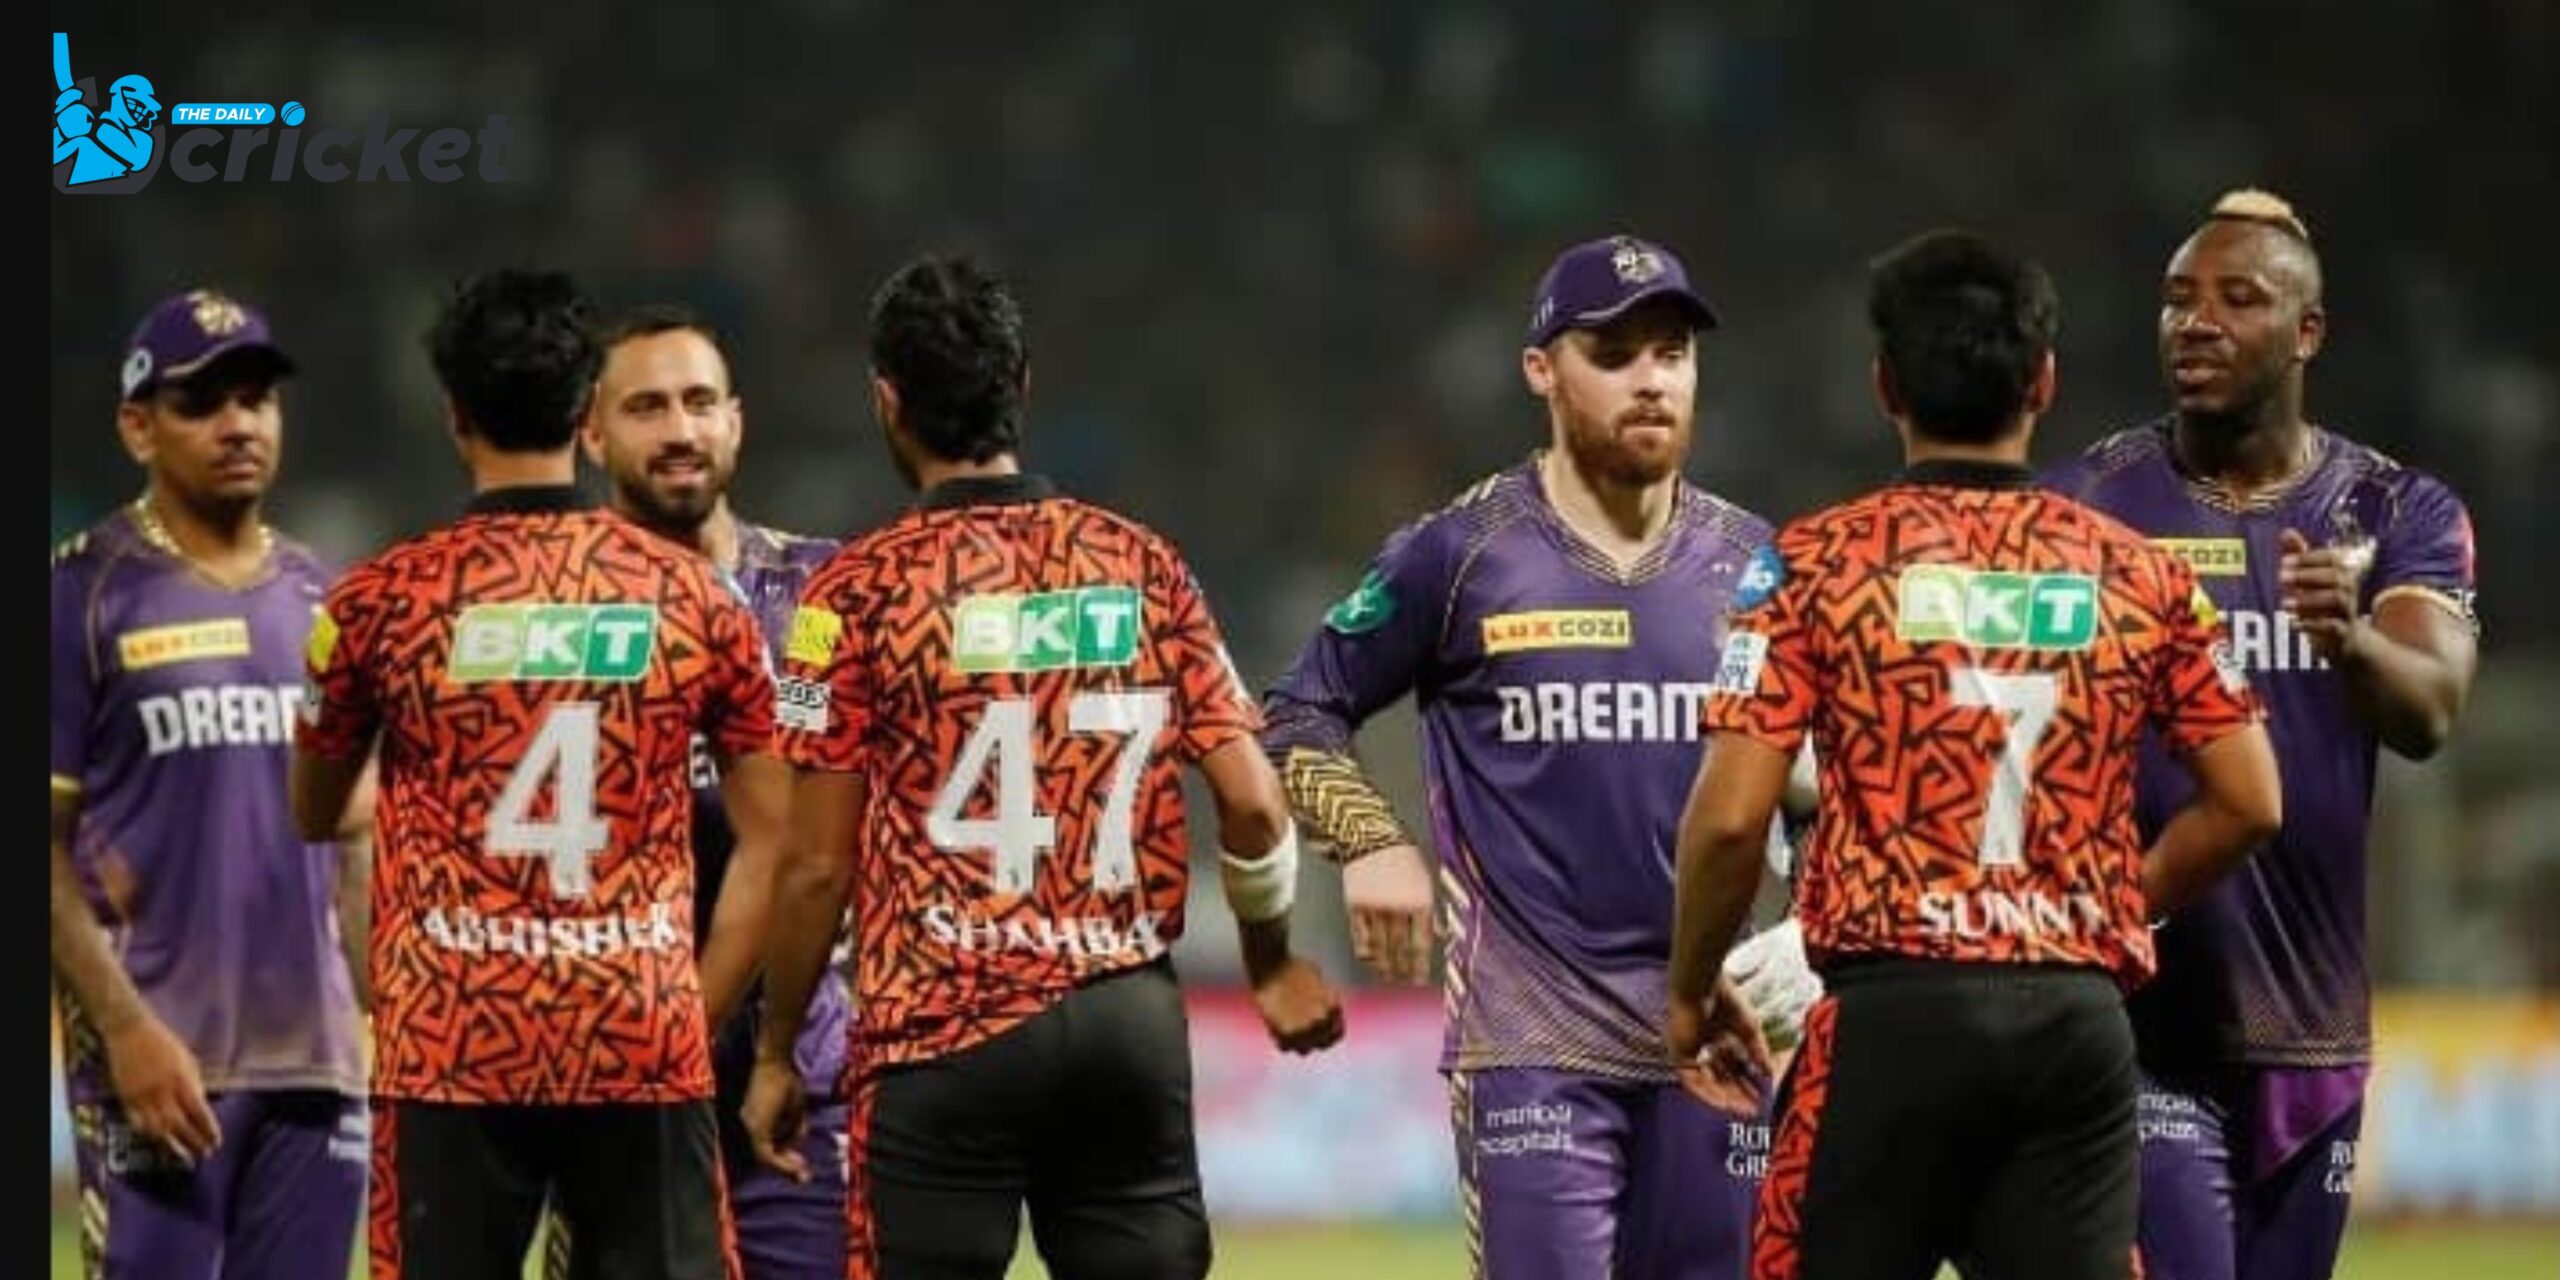 Who won yesterday's IPL match? Top highlights from yesterday night's KKR versus SRH playoff game